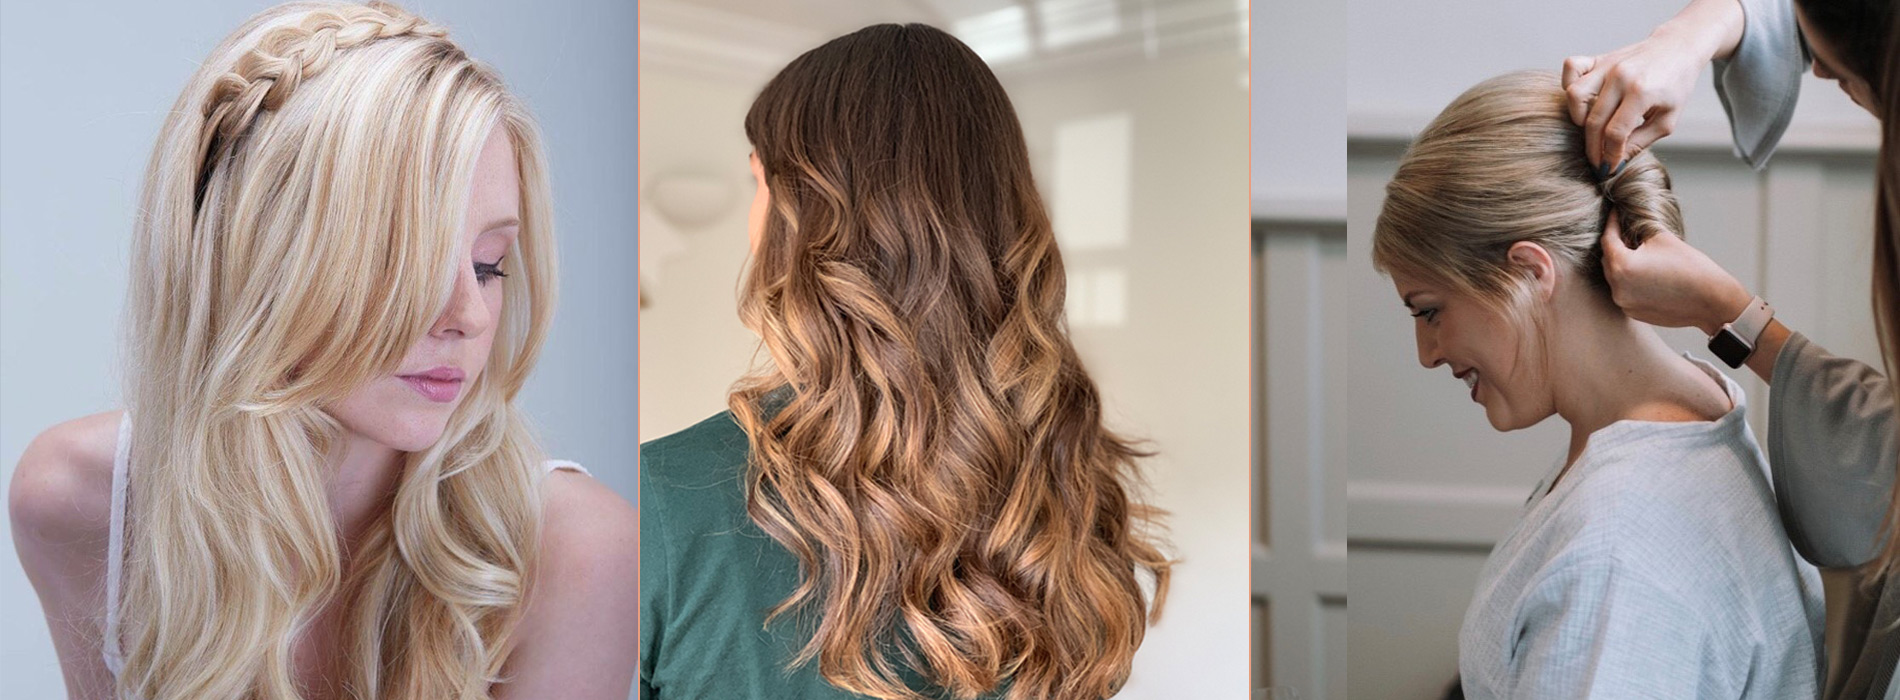 Colour Expert - Hairstylist